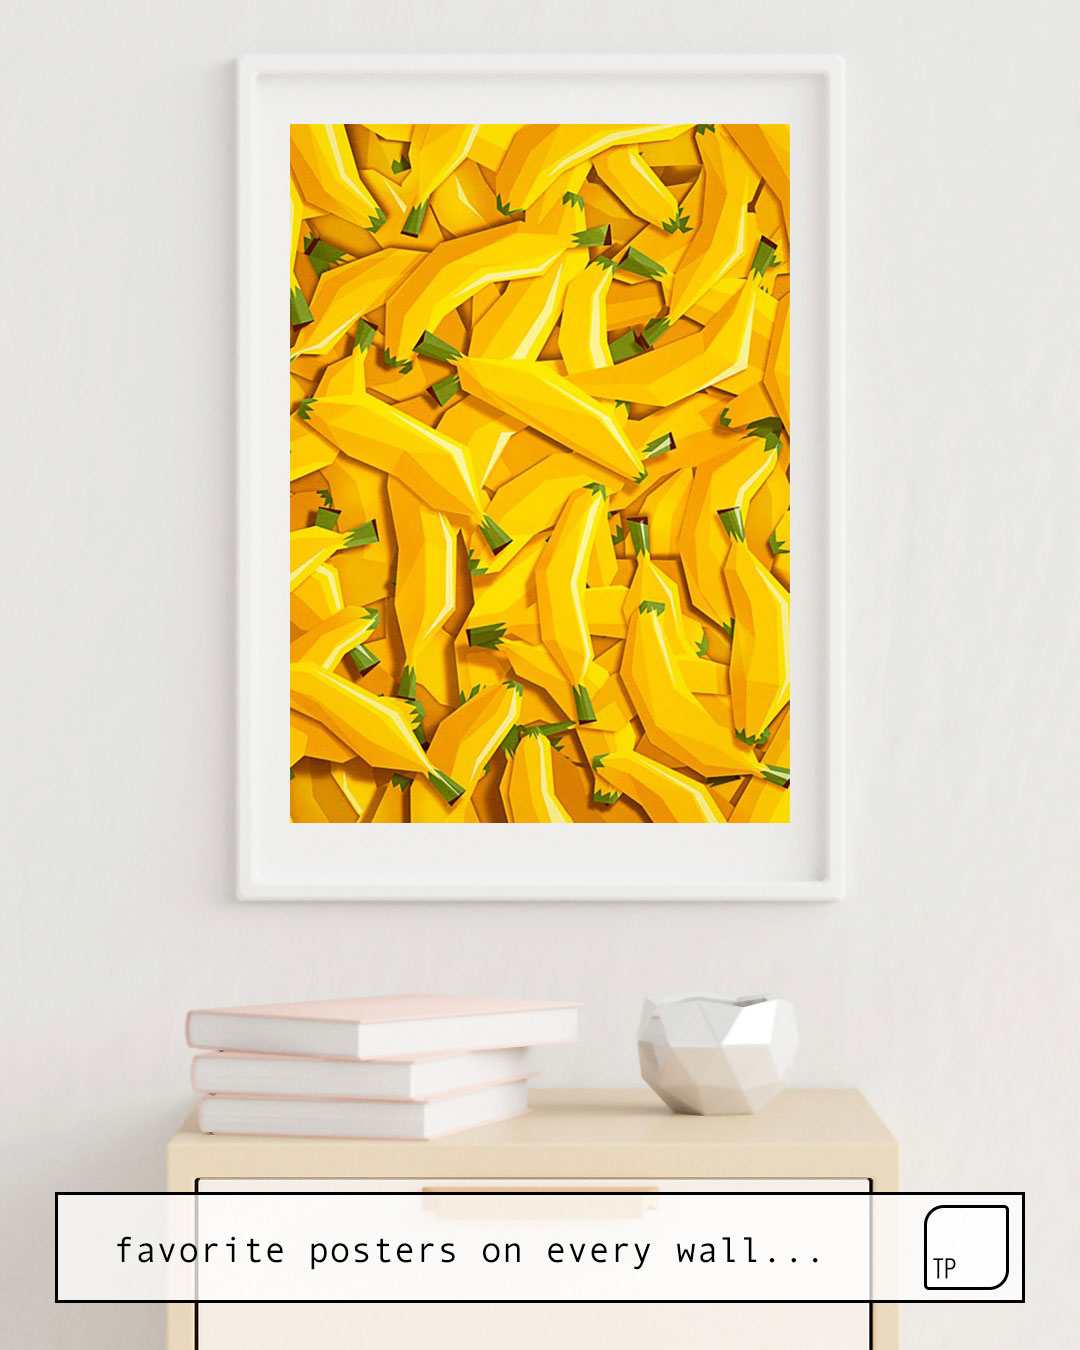 The photo shows an example of furnishing with the motif TOO MANY BANANAS by Yetiland as mural